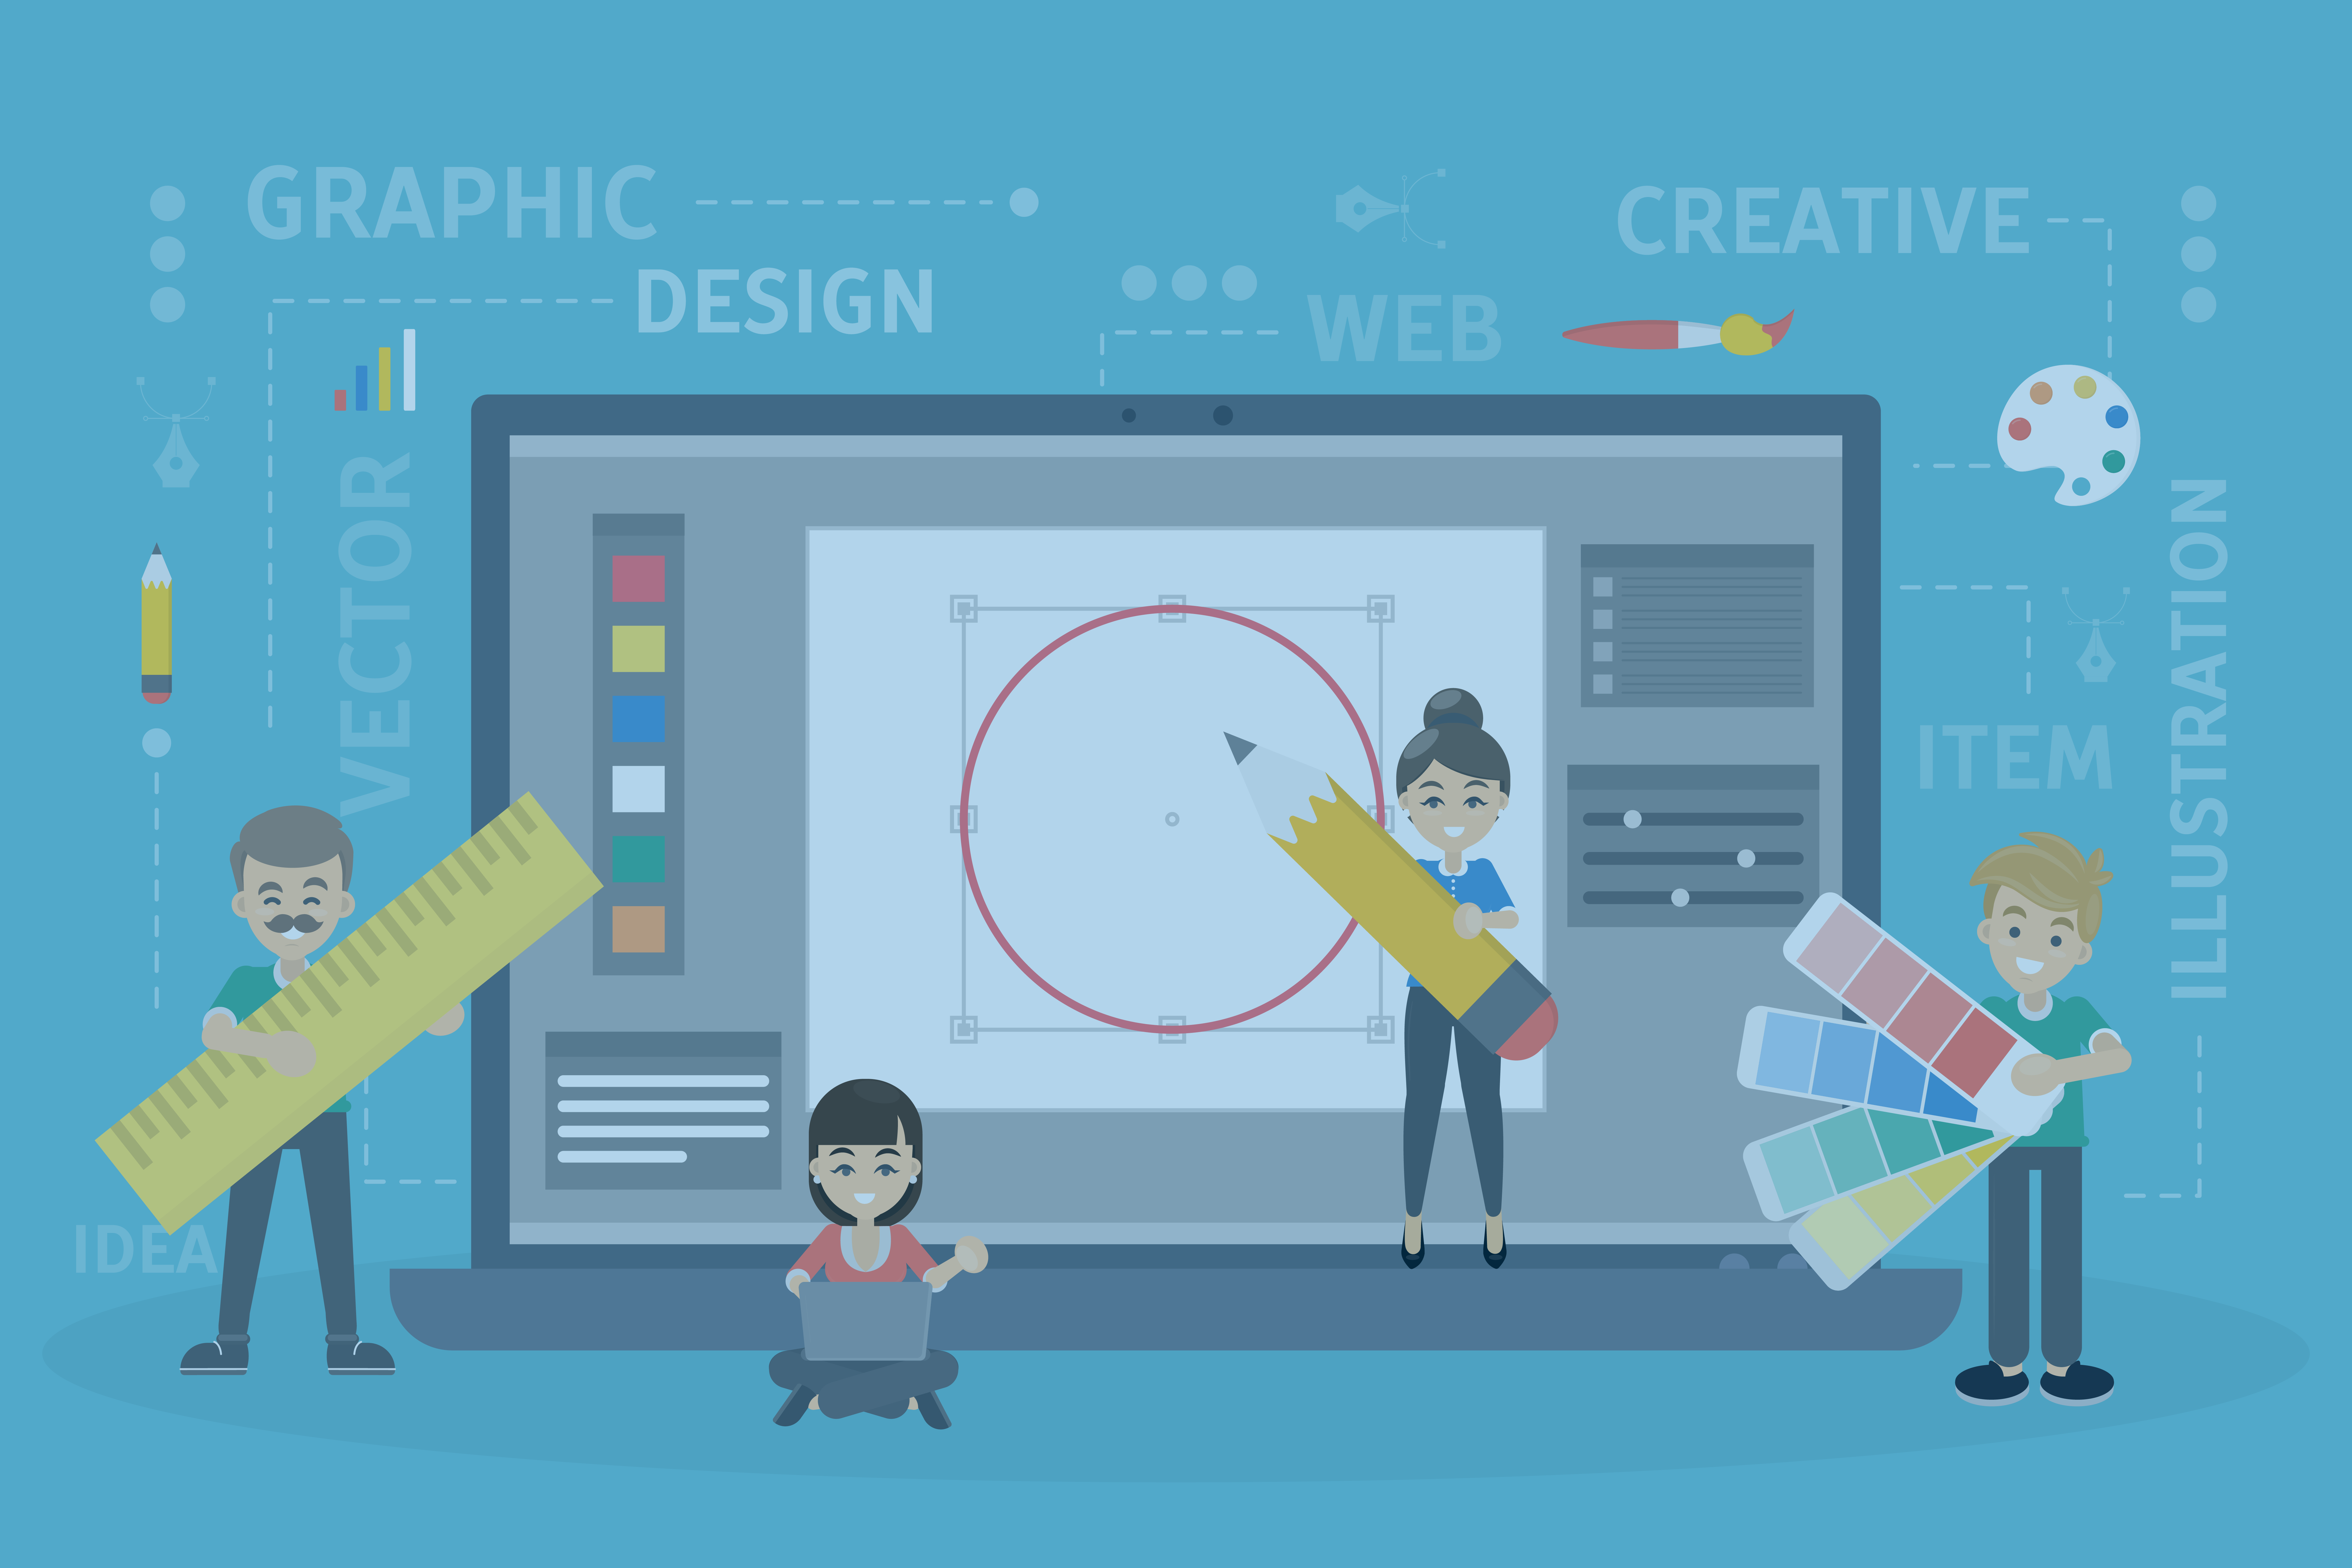 An illustration of four characters engaging in various design activities, with elements representing graphic design, web design, and creativity surrounding them.